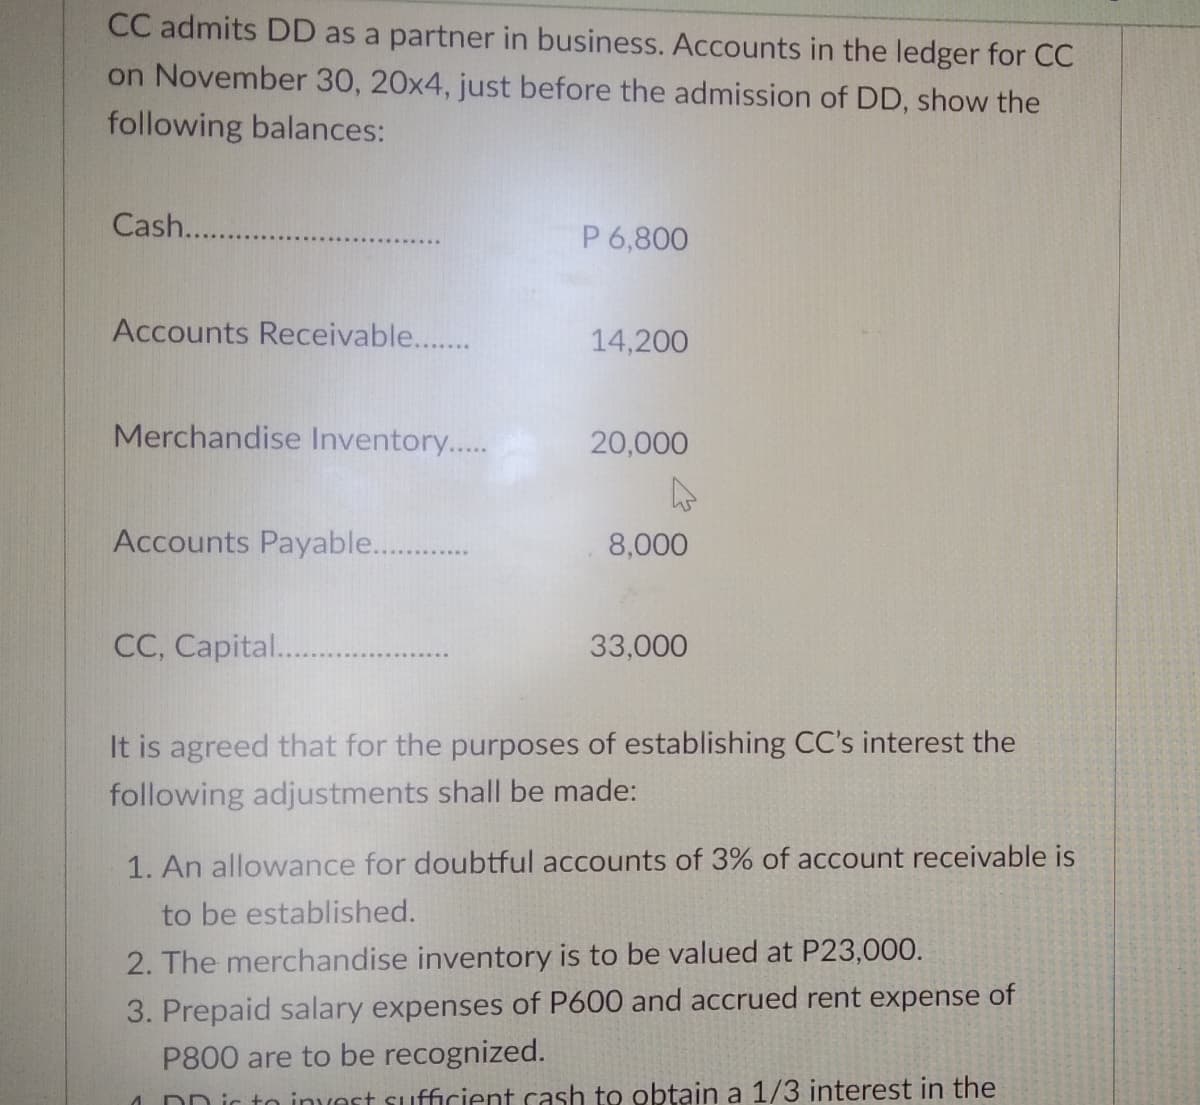 CC admits DD as a partner in business. Accounts in the ledger for CC
on November 30, 20x4, just before the admission of DD, show the
following balances:
Cash....
P 6,800
Accounts Receivable...
14,200
Merchandise Inventory...
20,000
Accounts Payable.. .
8,000
CC, Capital...
33,000
It is agreed that for the purposes of establishing CC's interest the
following adjustments shall be made:
1. An allowance for doubtful accounts of 3% of account receivable is
to be established.
2. The merchandise inventory is to be valued at P23,000.
3. Prepaid salary expenses of P600 and accrued rent expense of
P800 are to be recognized.
1 DD ic to invest sufficient cash to obtain a 1/3 interest in the
